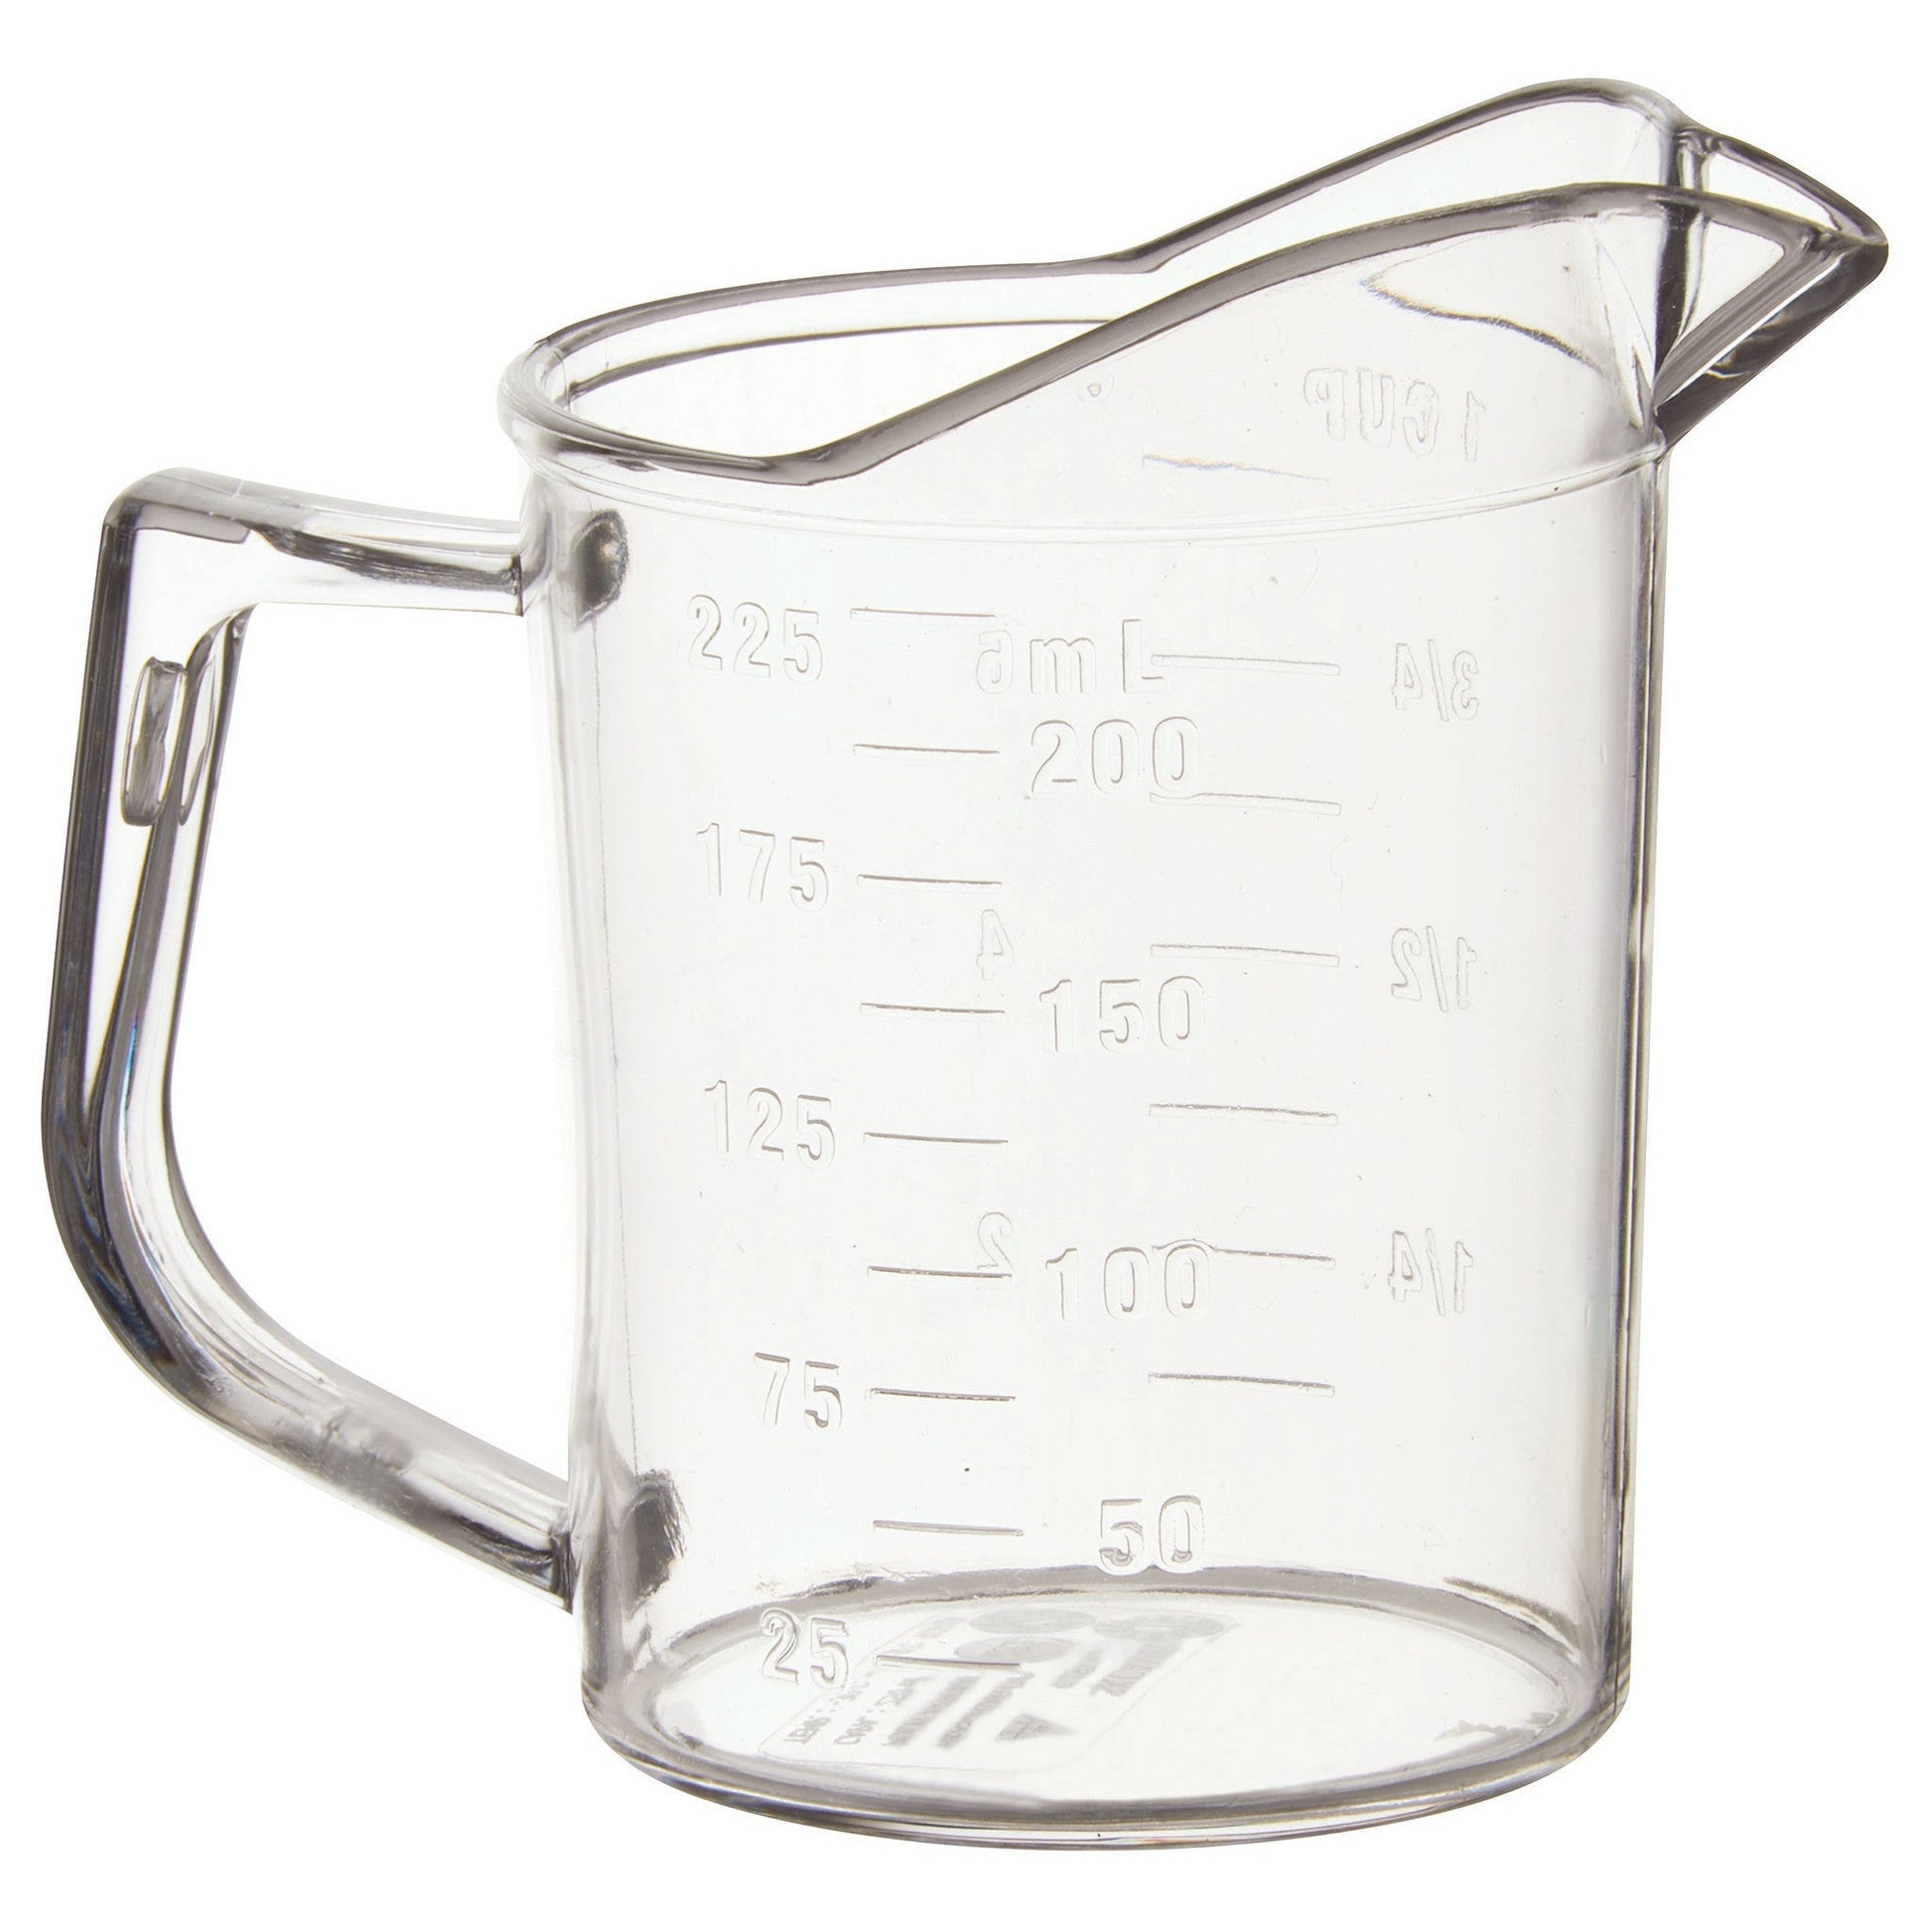 A liquid measuring cup and the metric system  More Than A Mile Behind:  America and the Metric System